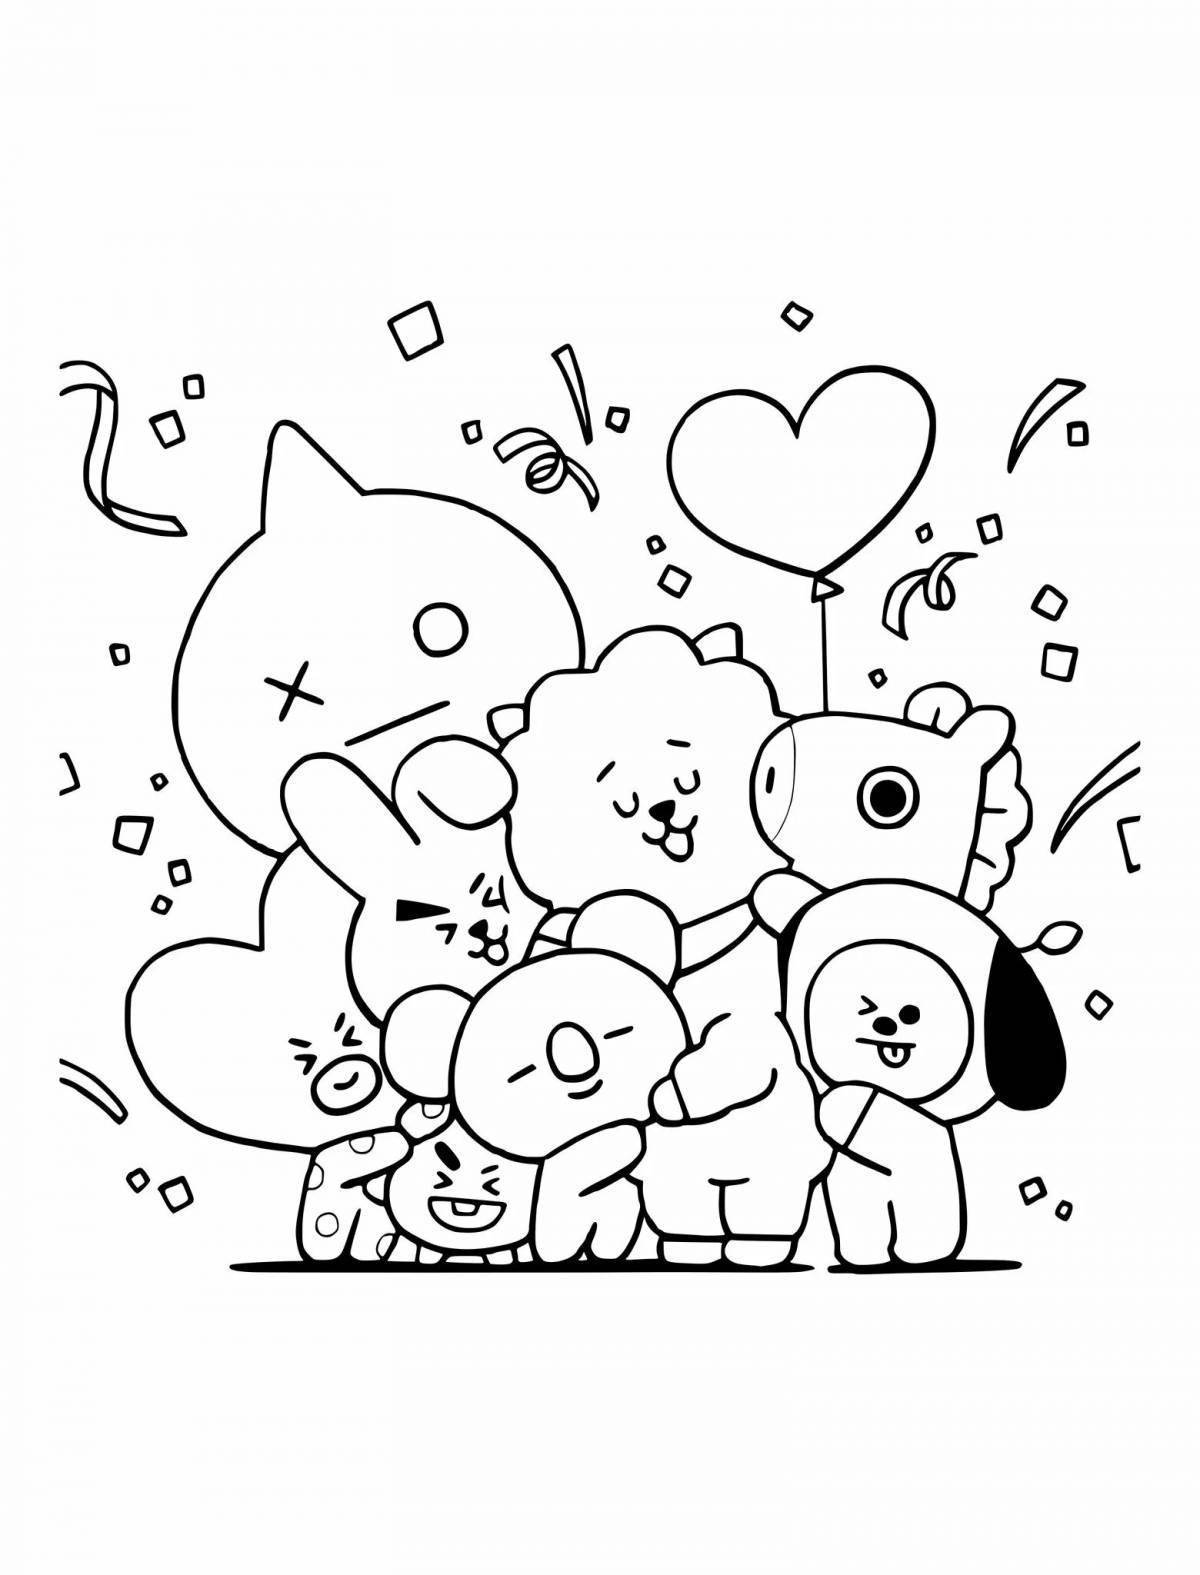 Bt21 Coloring book